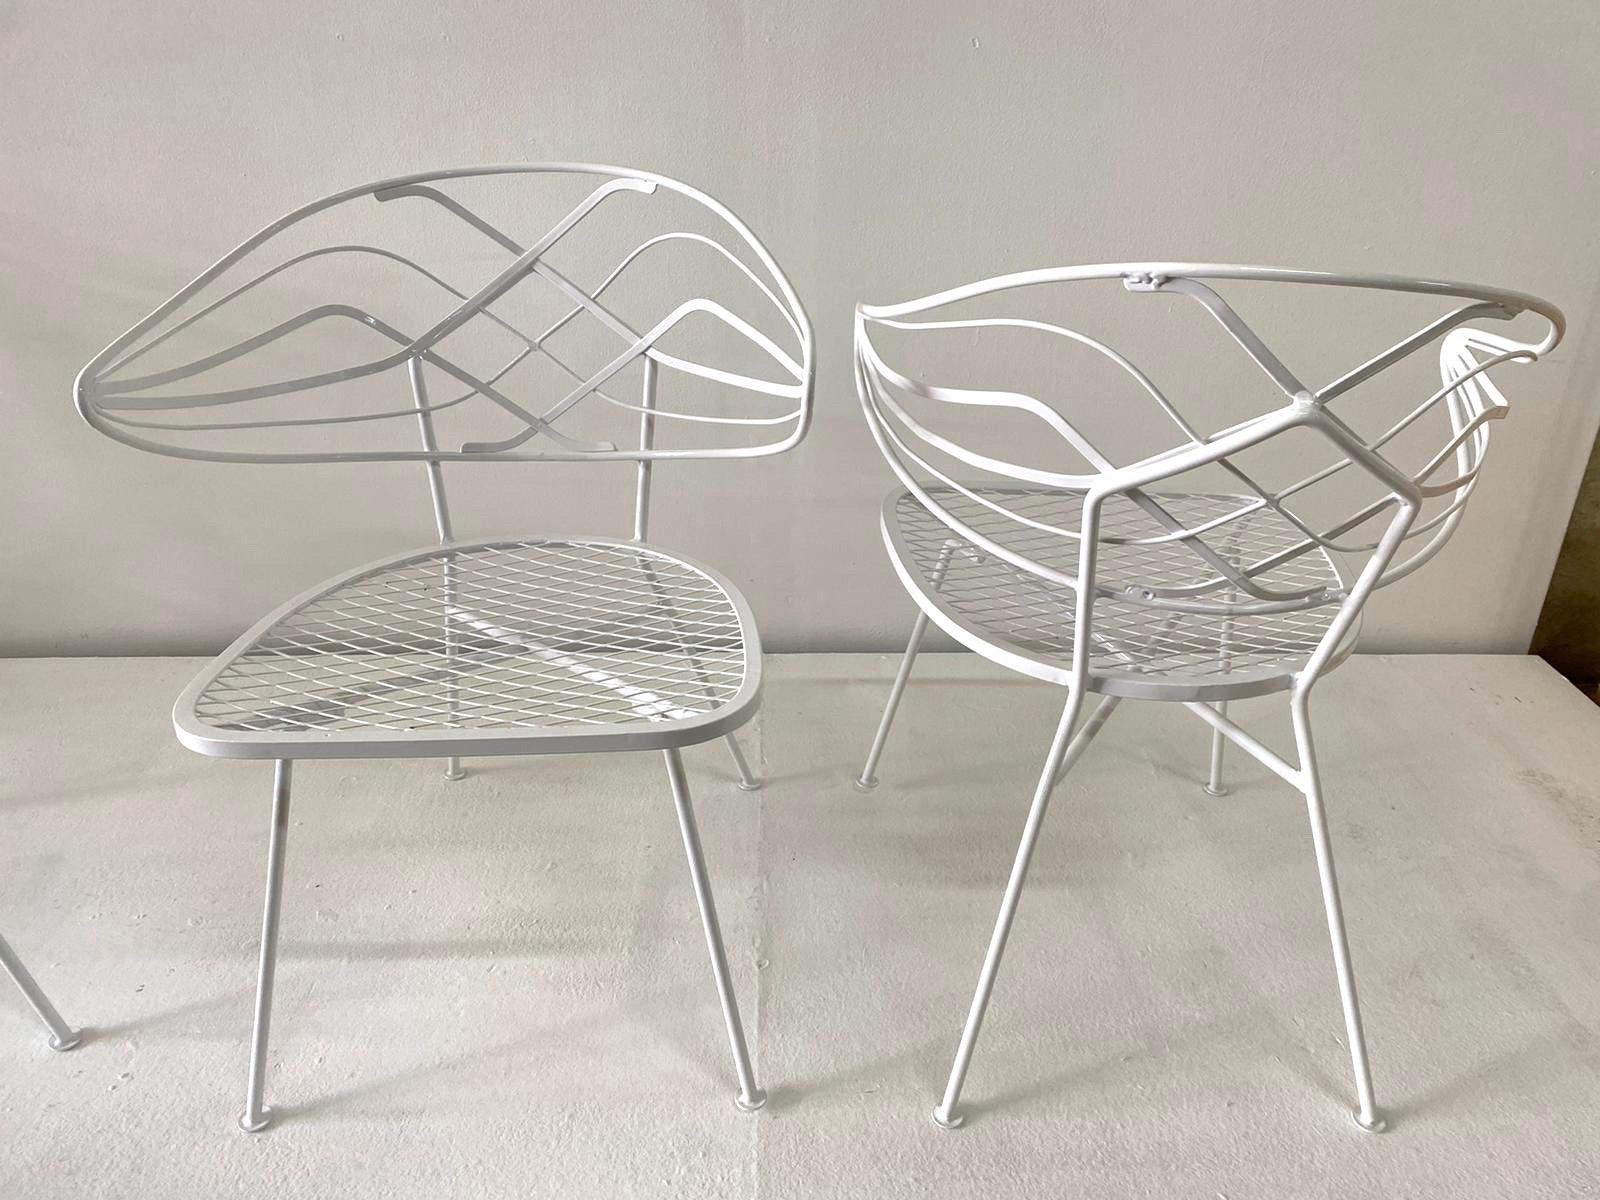 Four wonderful Klismos style curve back chairs - newly powder-coated. Chic in style and great Summer lounge chairs.